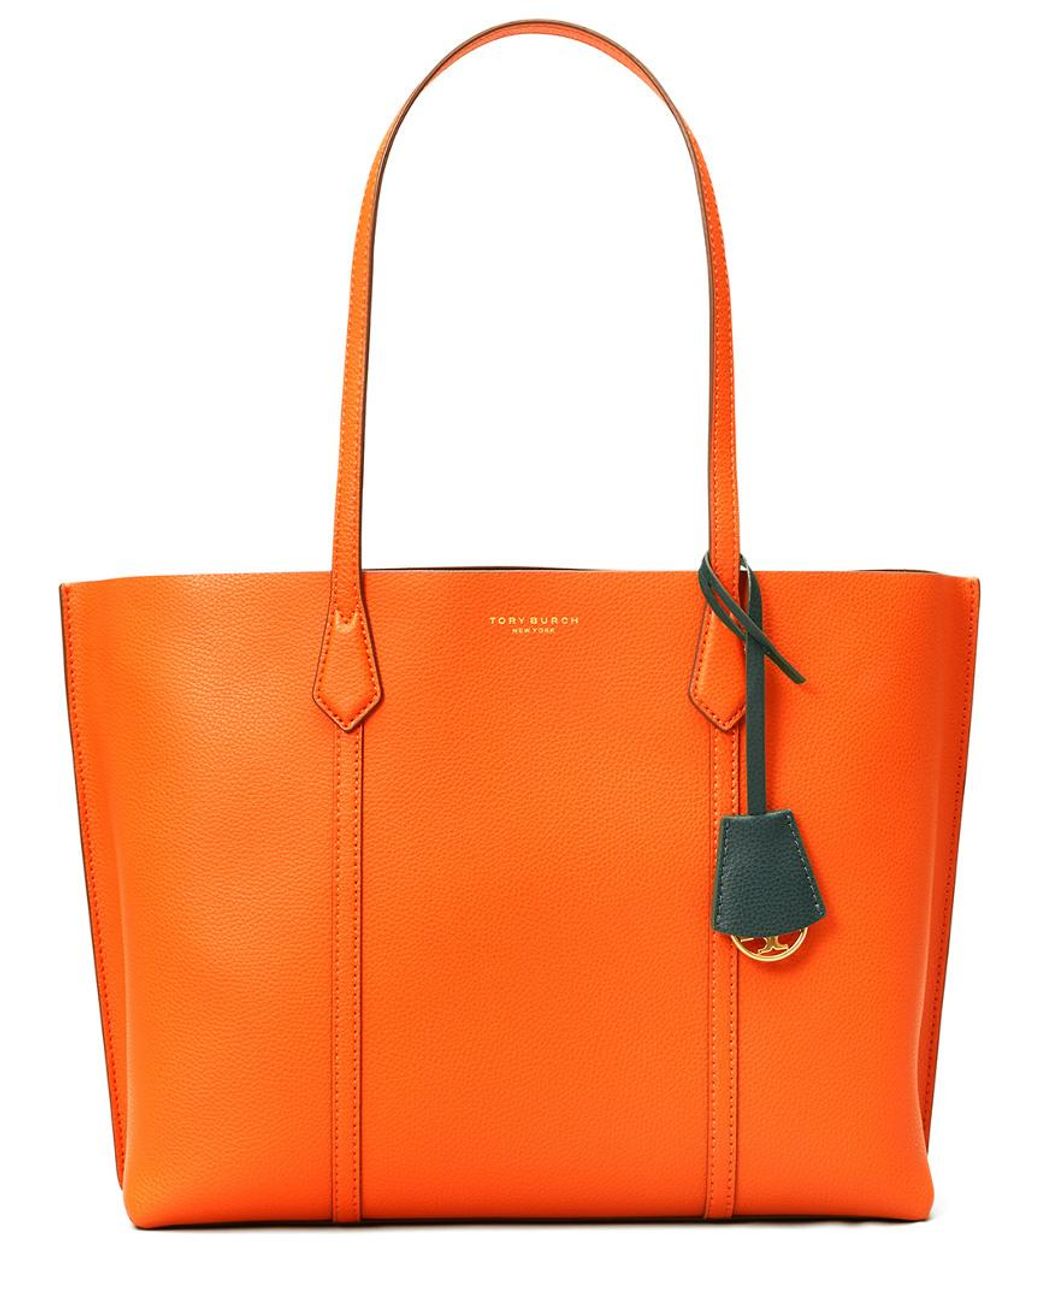 Tory Burch Perry Leather Tote Bag in Orange | Lyst Canada